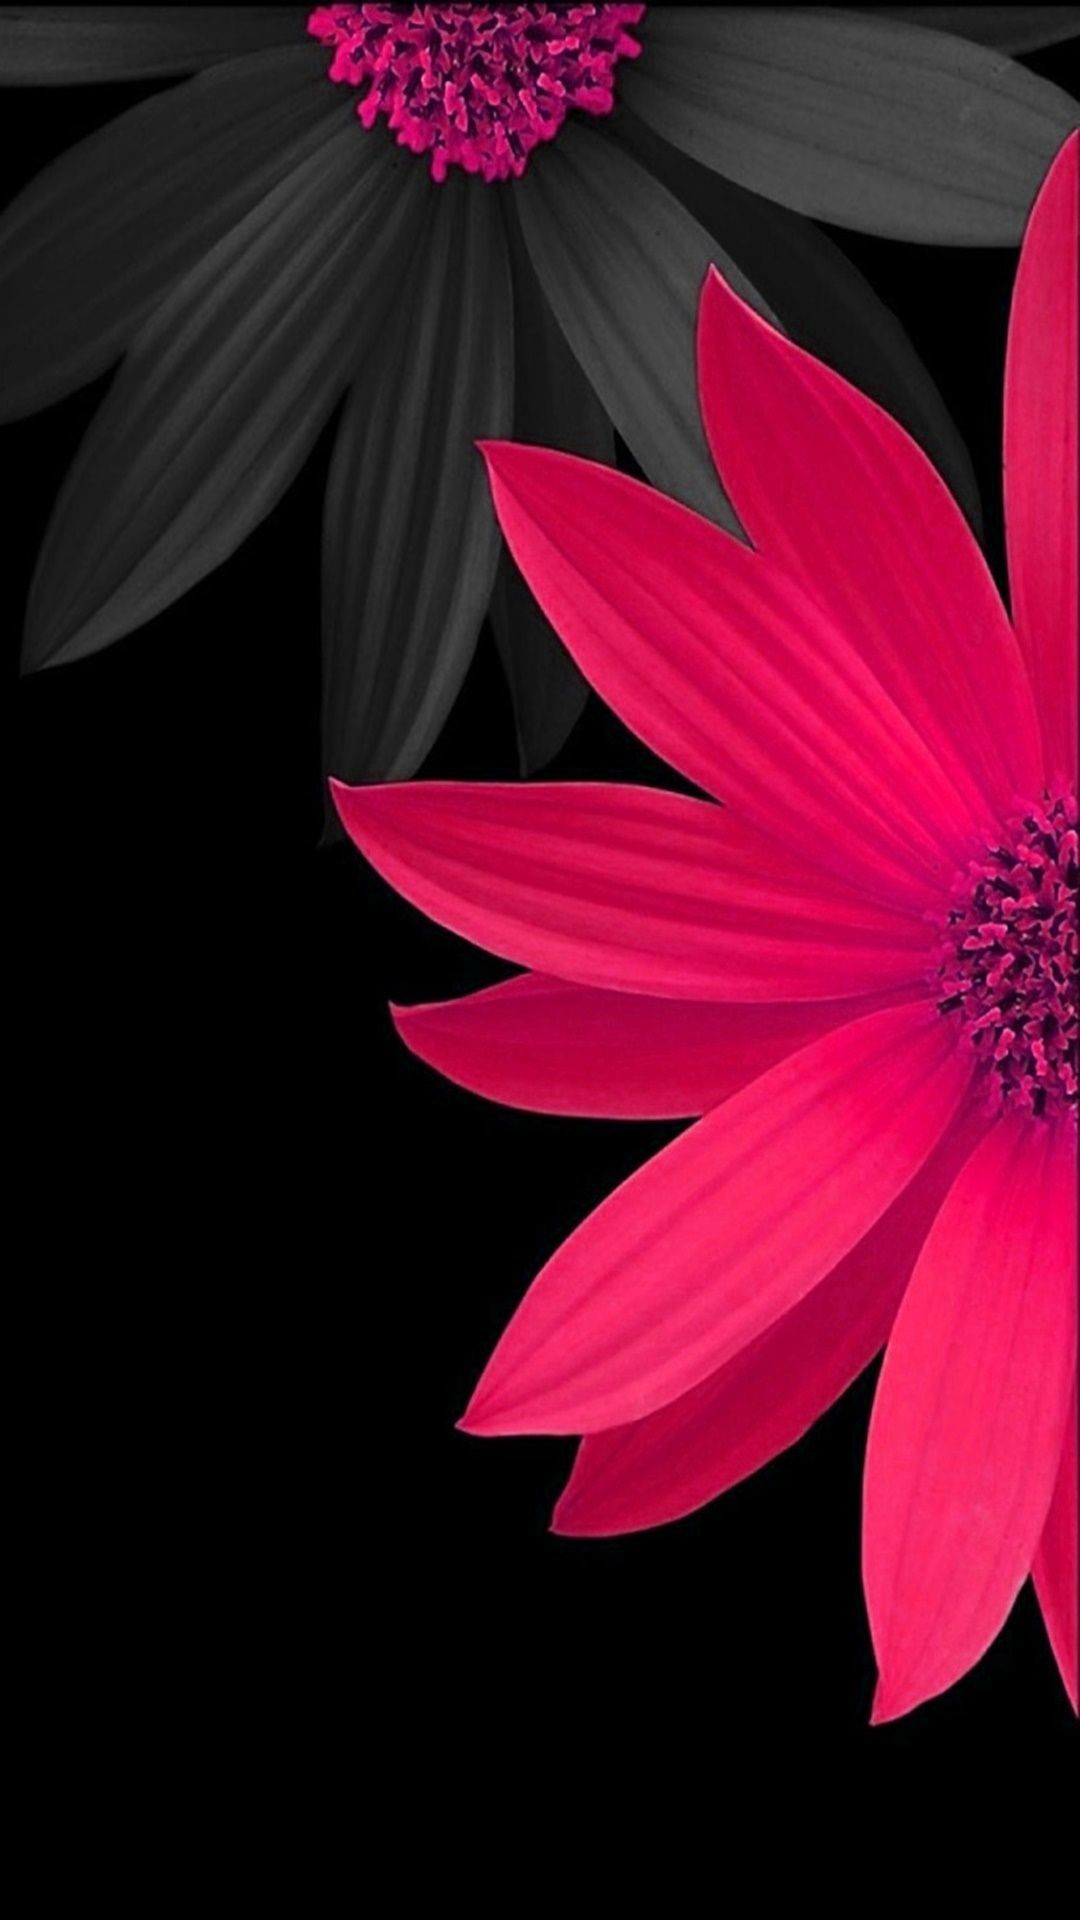 Free download Black Flower Wallpaper 64 images [1080x1920] for your